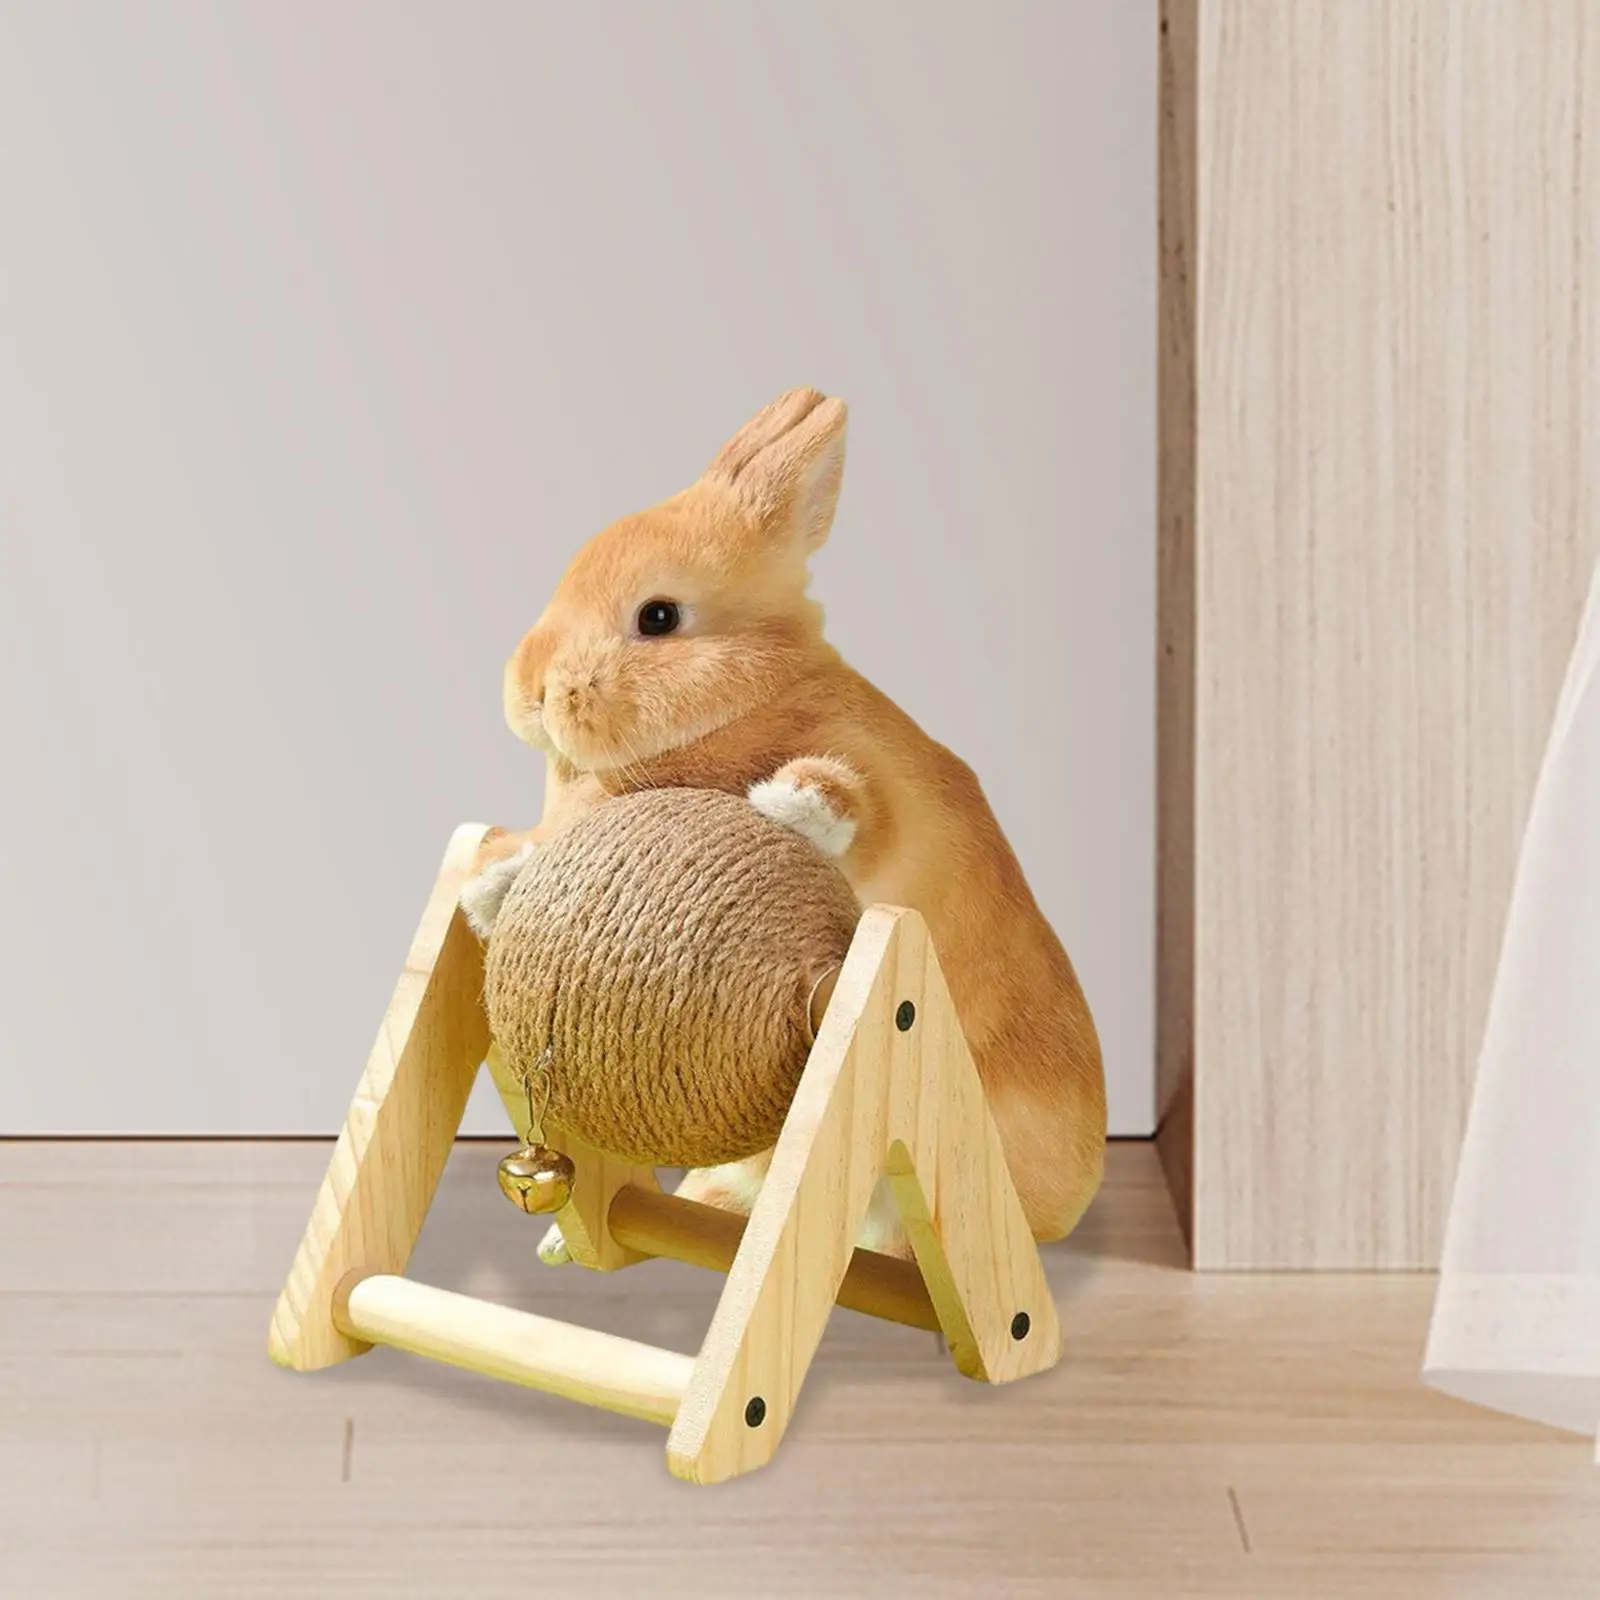 Rabbit Scratch Toy Bunny Scratcher with Ball Wear Resistant Scratch Resistant